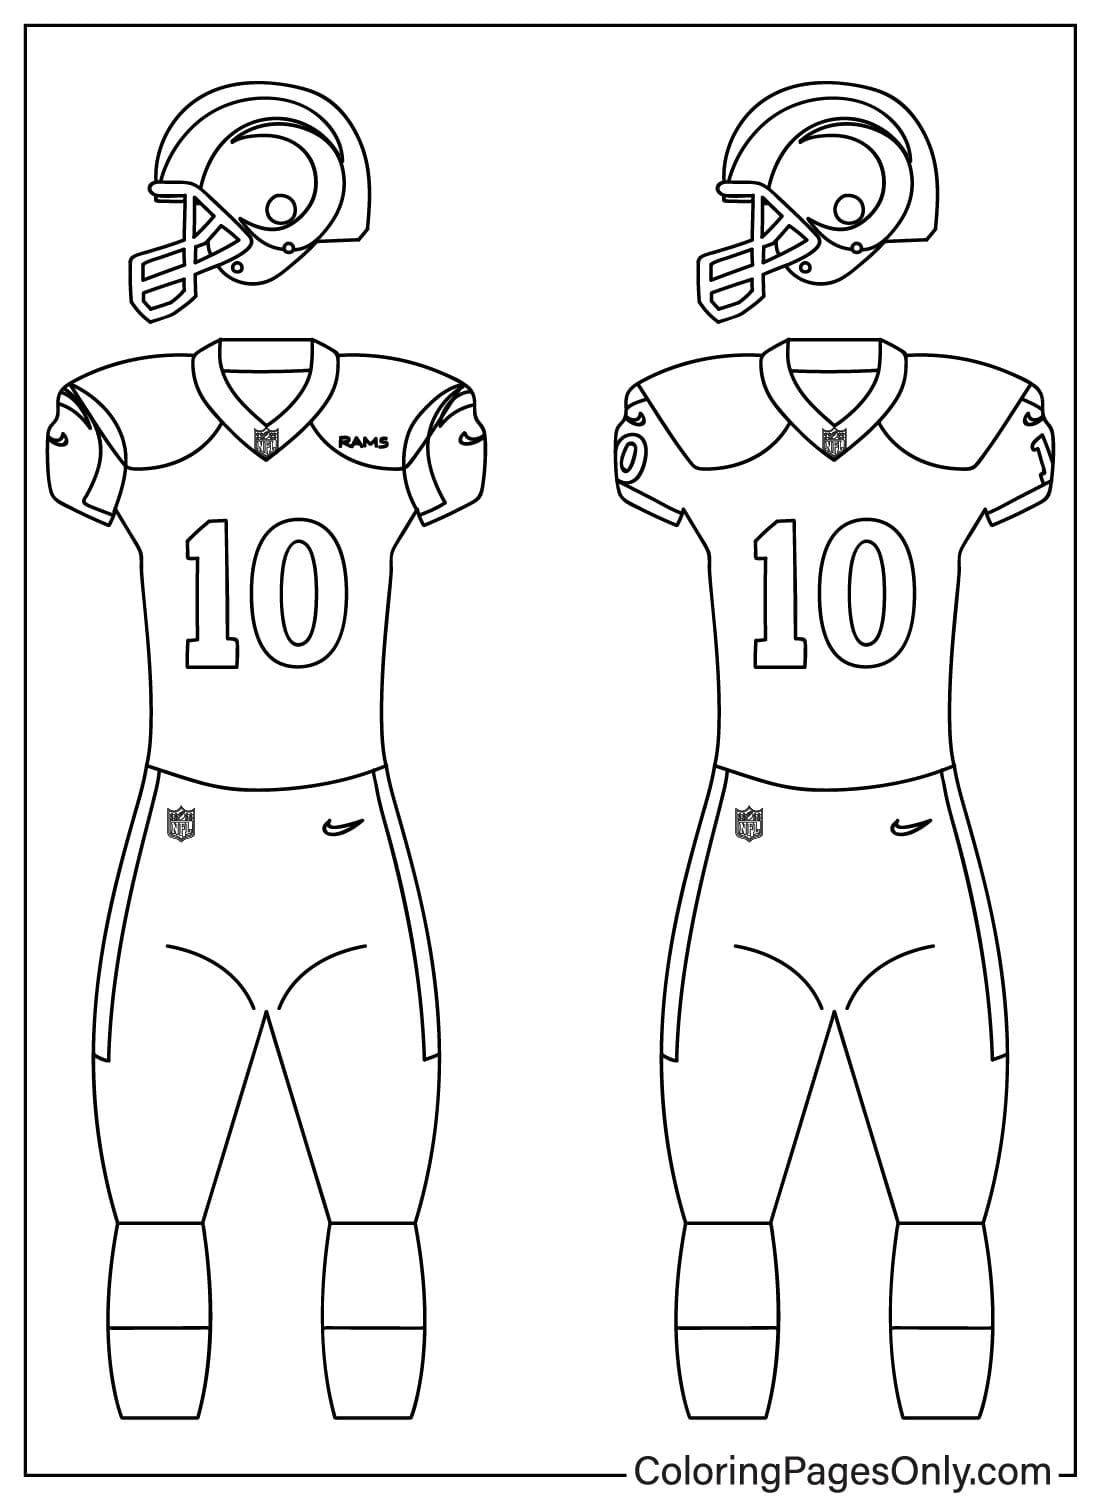 18 Free Printable Los Angeles Rams Coloring Pages